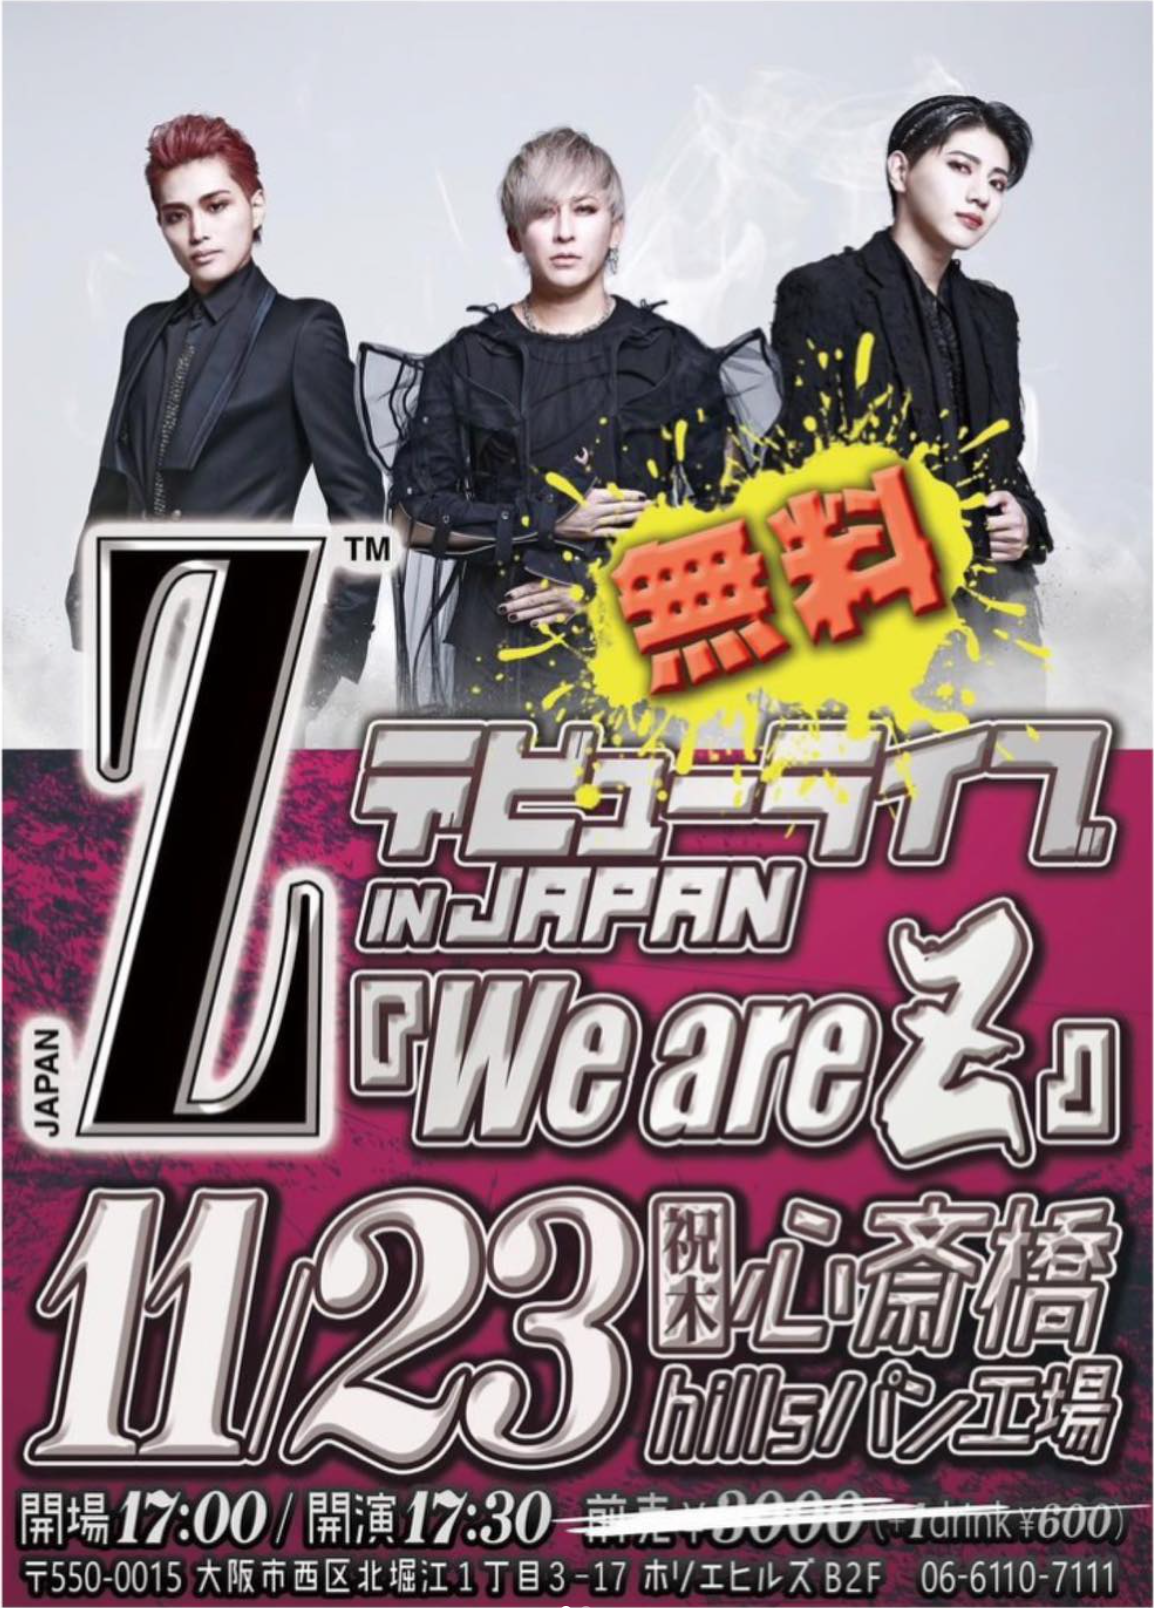 『Z』さんのデビューライブinJAPAN 「We are Z」